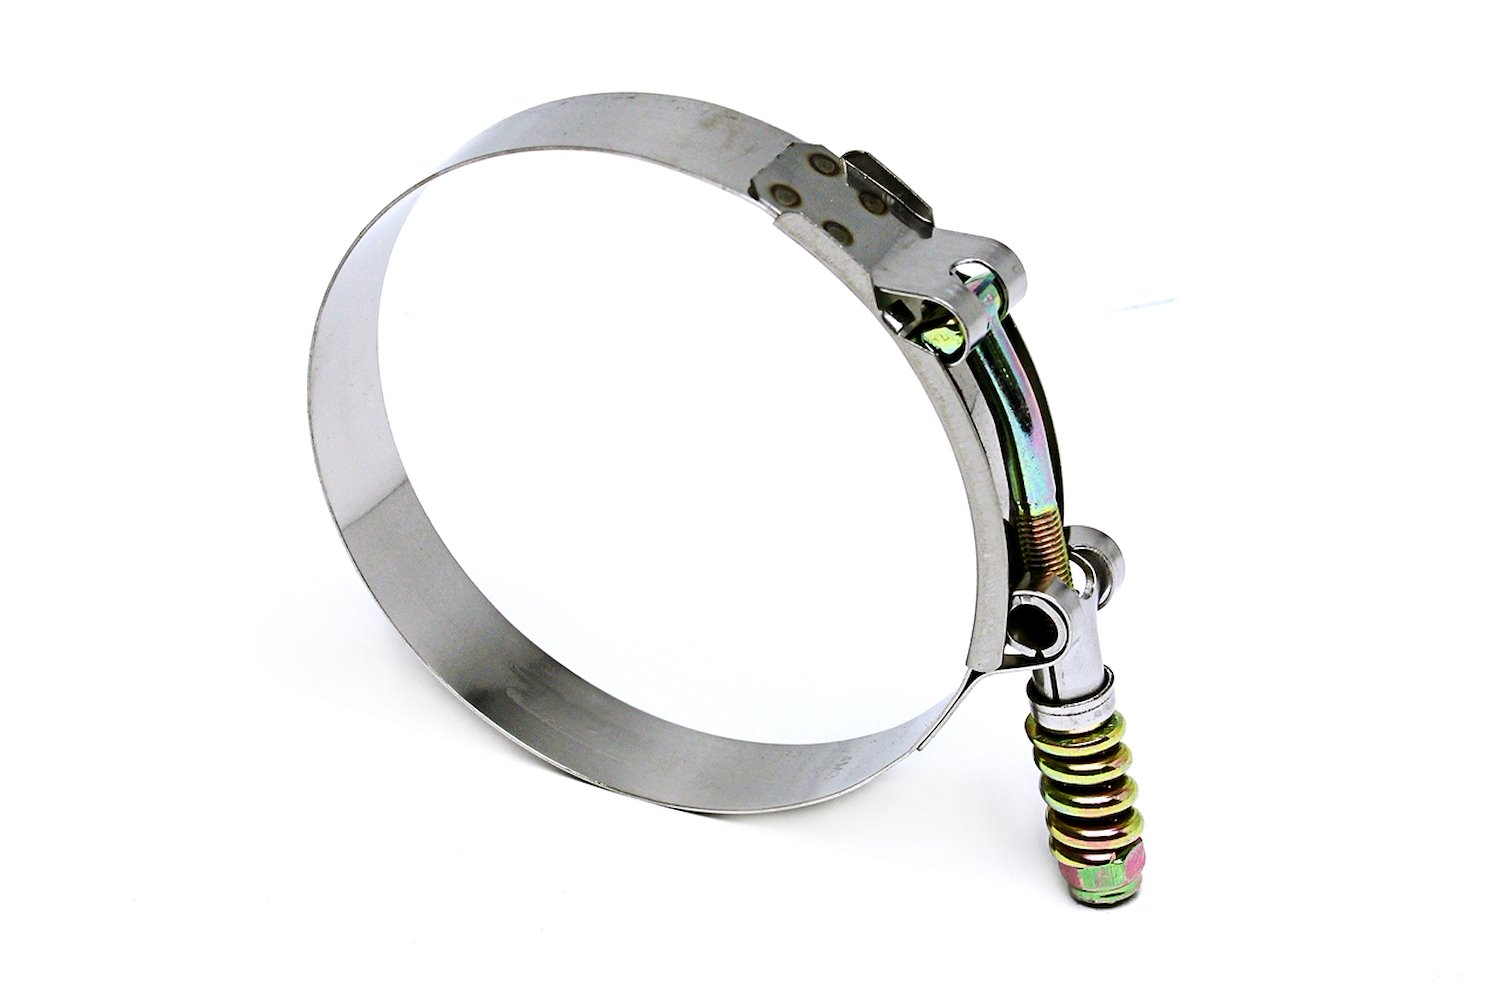 SLTC-265 Stainless Steel Spring Loaded T-Bolt Hose Clamp, Size #56, Range: 2.64 in.-2.95 in.